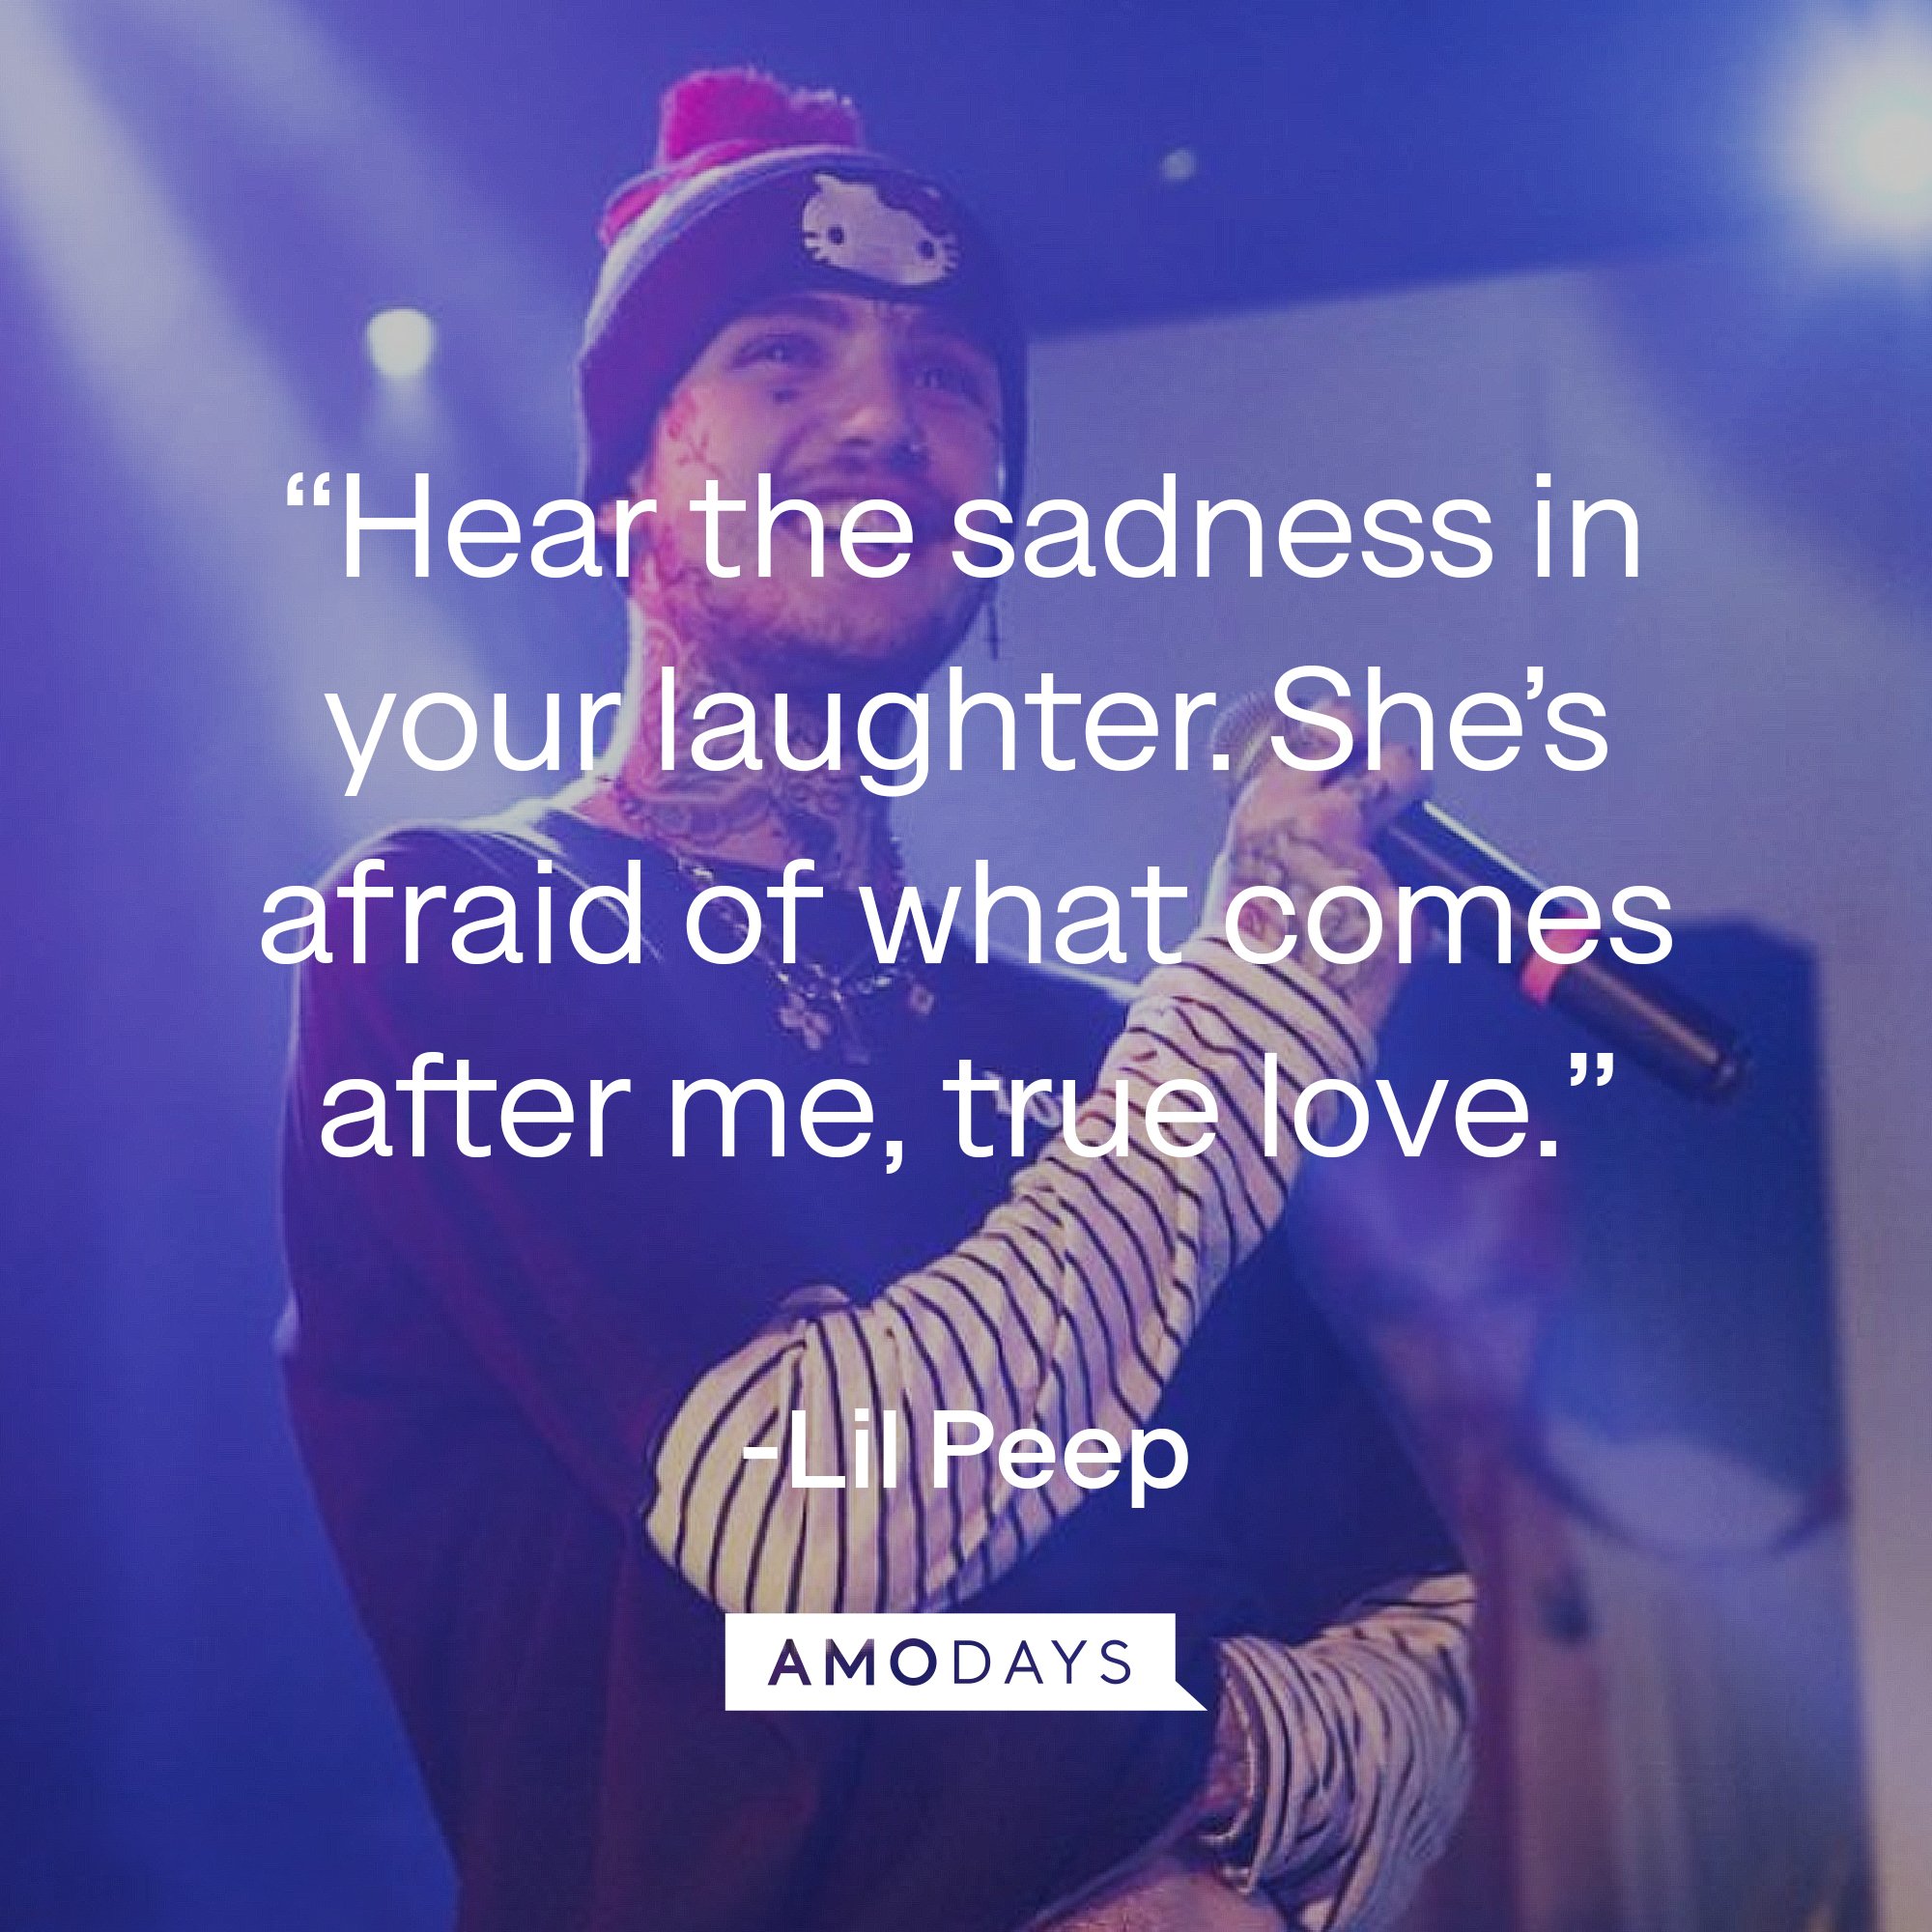 Lil Peep's quote: “Hear the sadness in your laughter. She’s afraid of what comes after me, true love.” | Image: AmoDays